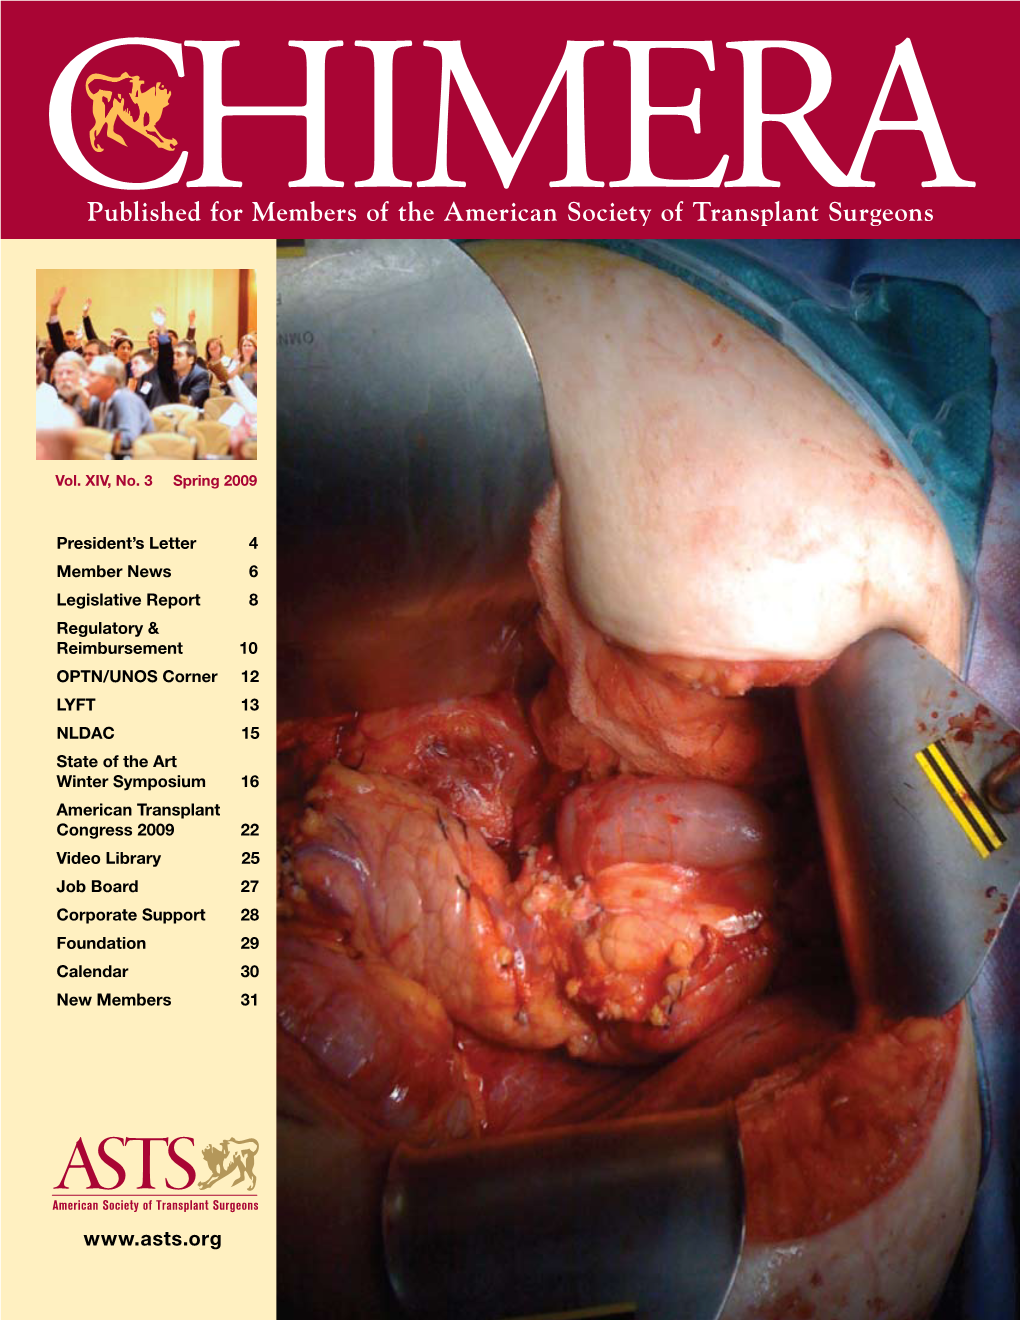 Published for Members of the American Society of Transplant Surgeons